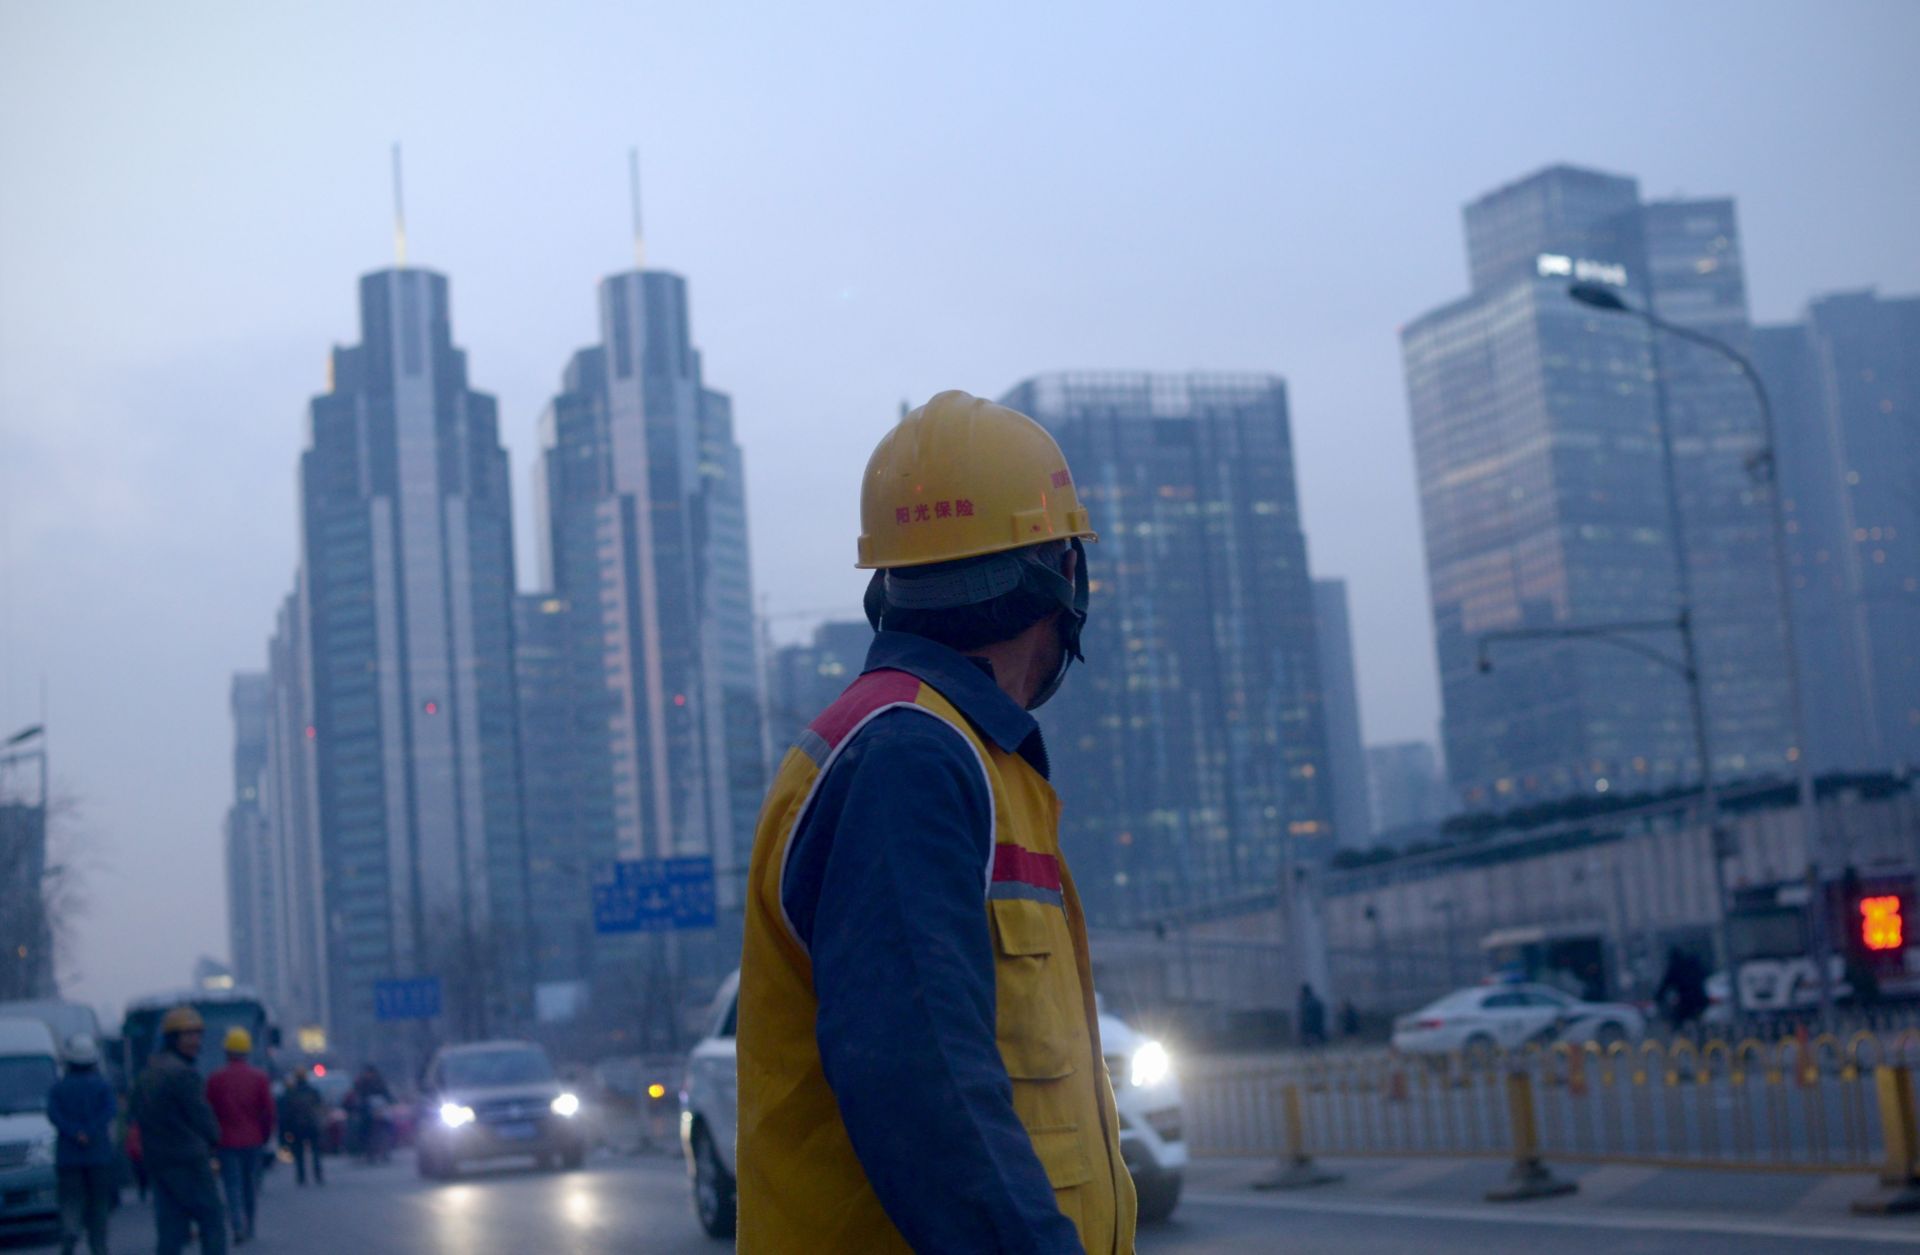 A Chinese worker looks on as he walks along a street in Beijing after finishing his shift.